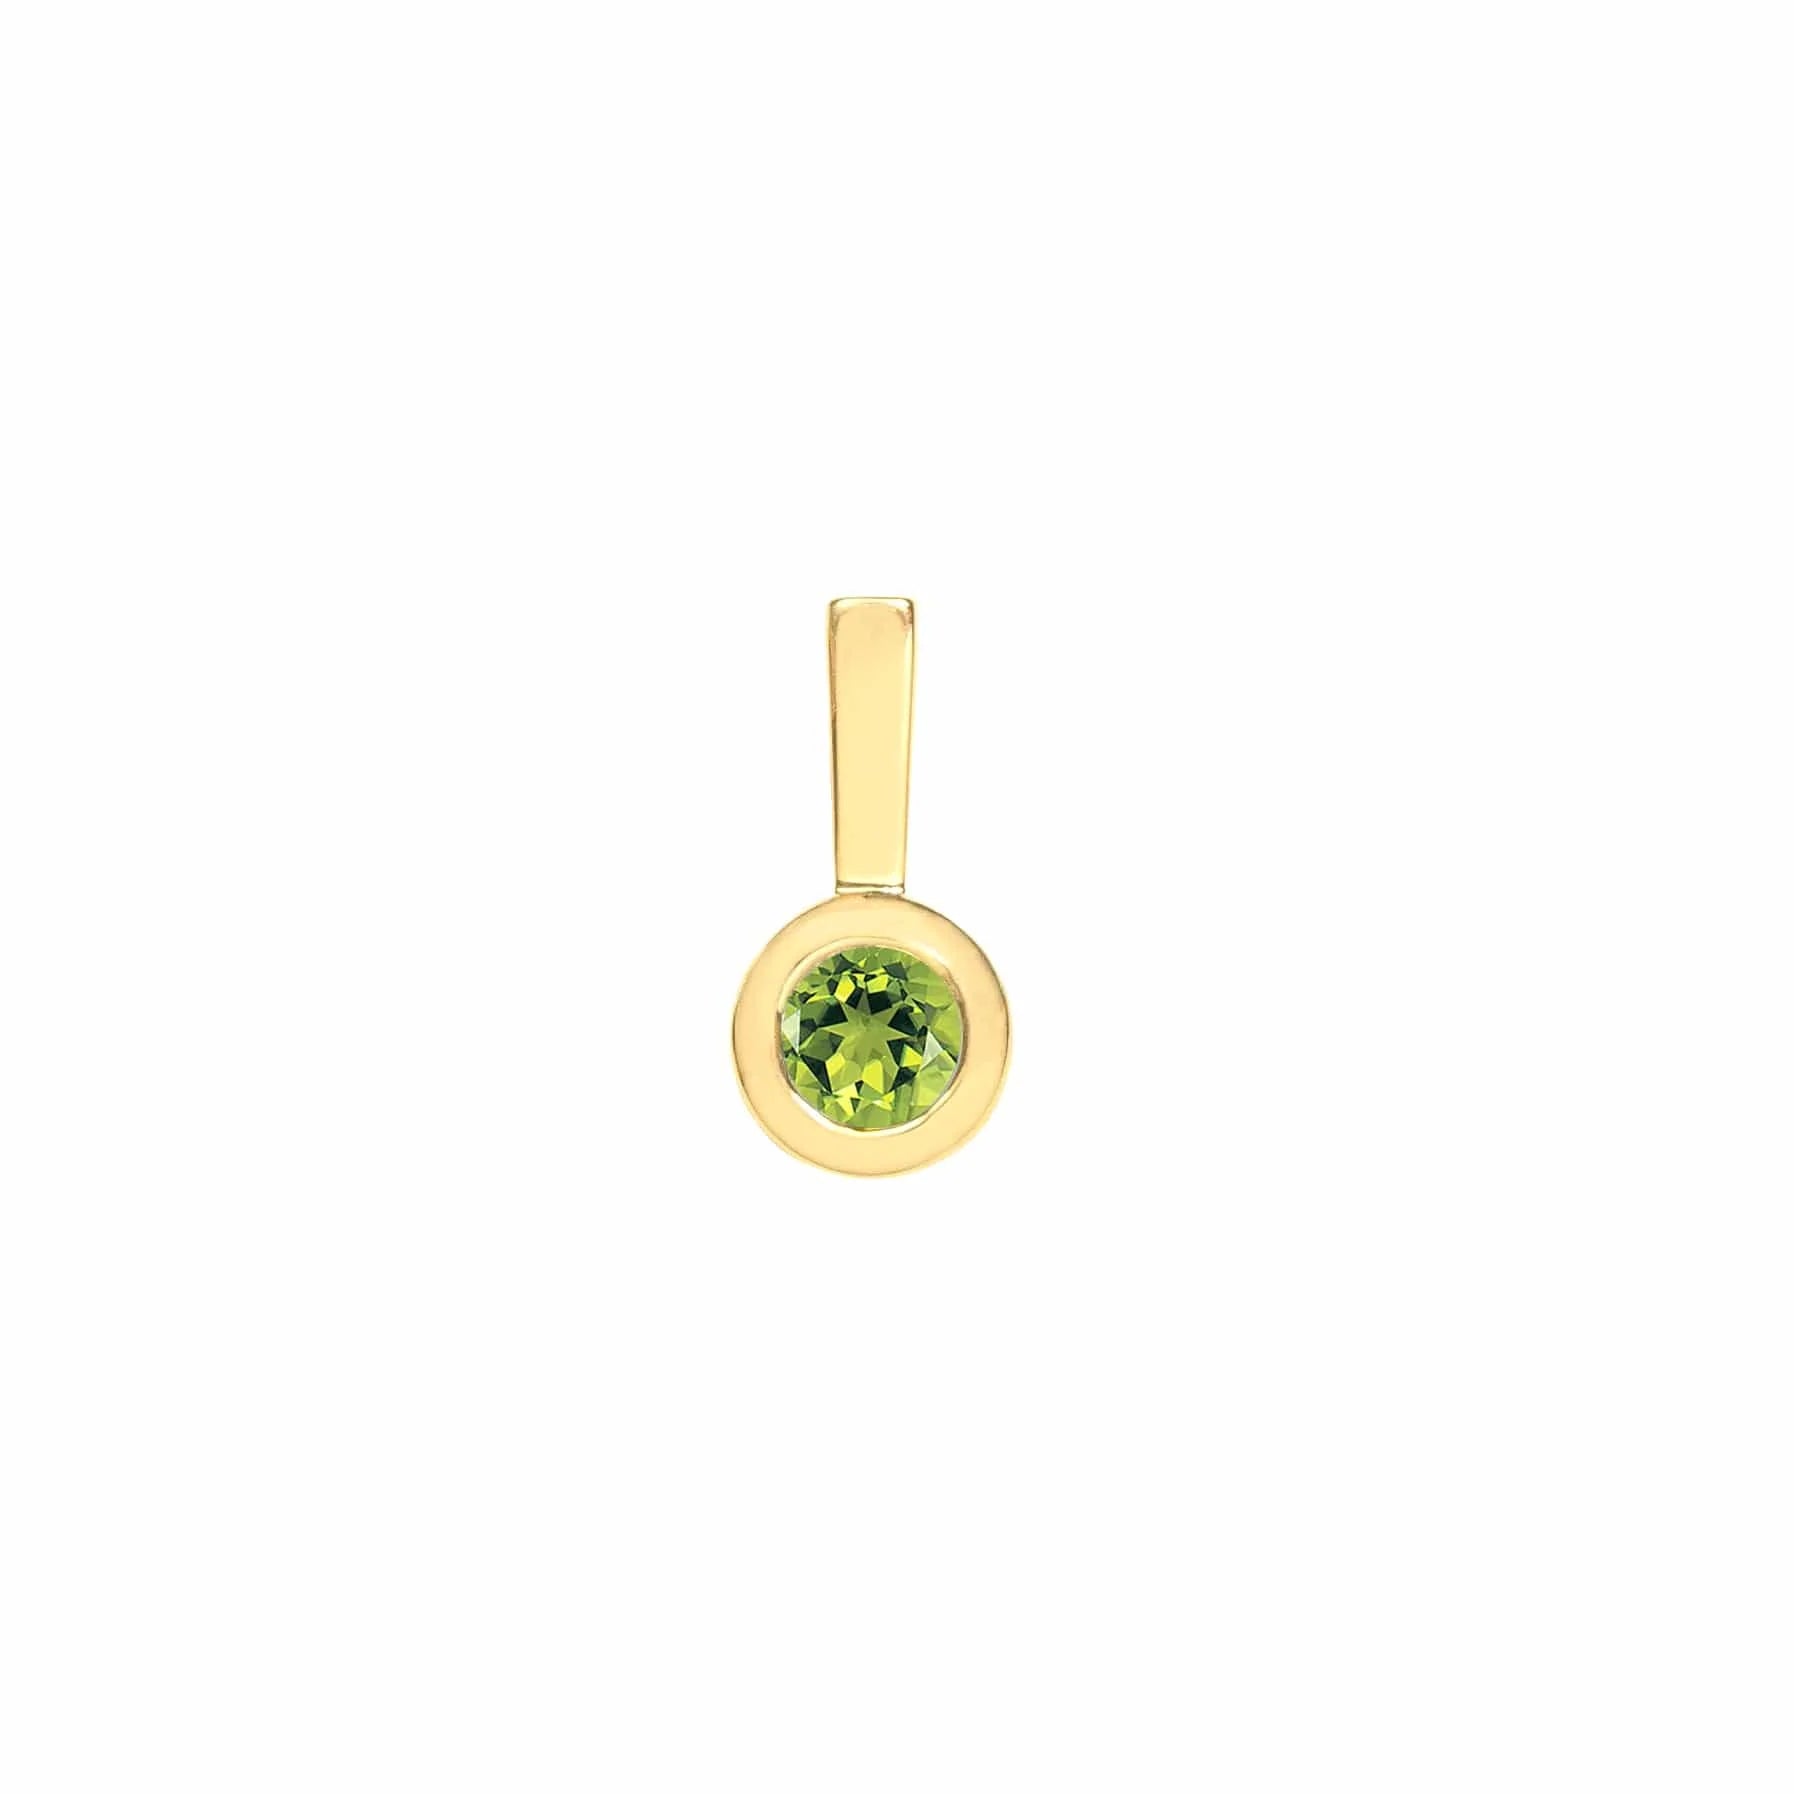 MICHAEL M Necklaces 14K Yellow Gold / Peridot - August Deco Birthstone Charm P404PER